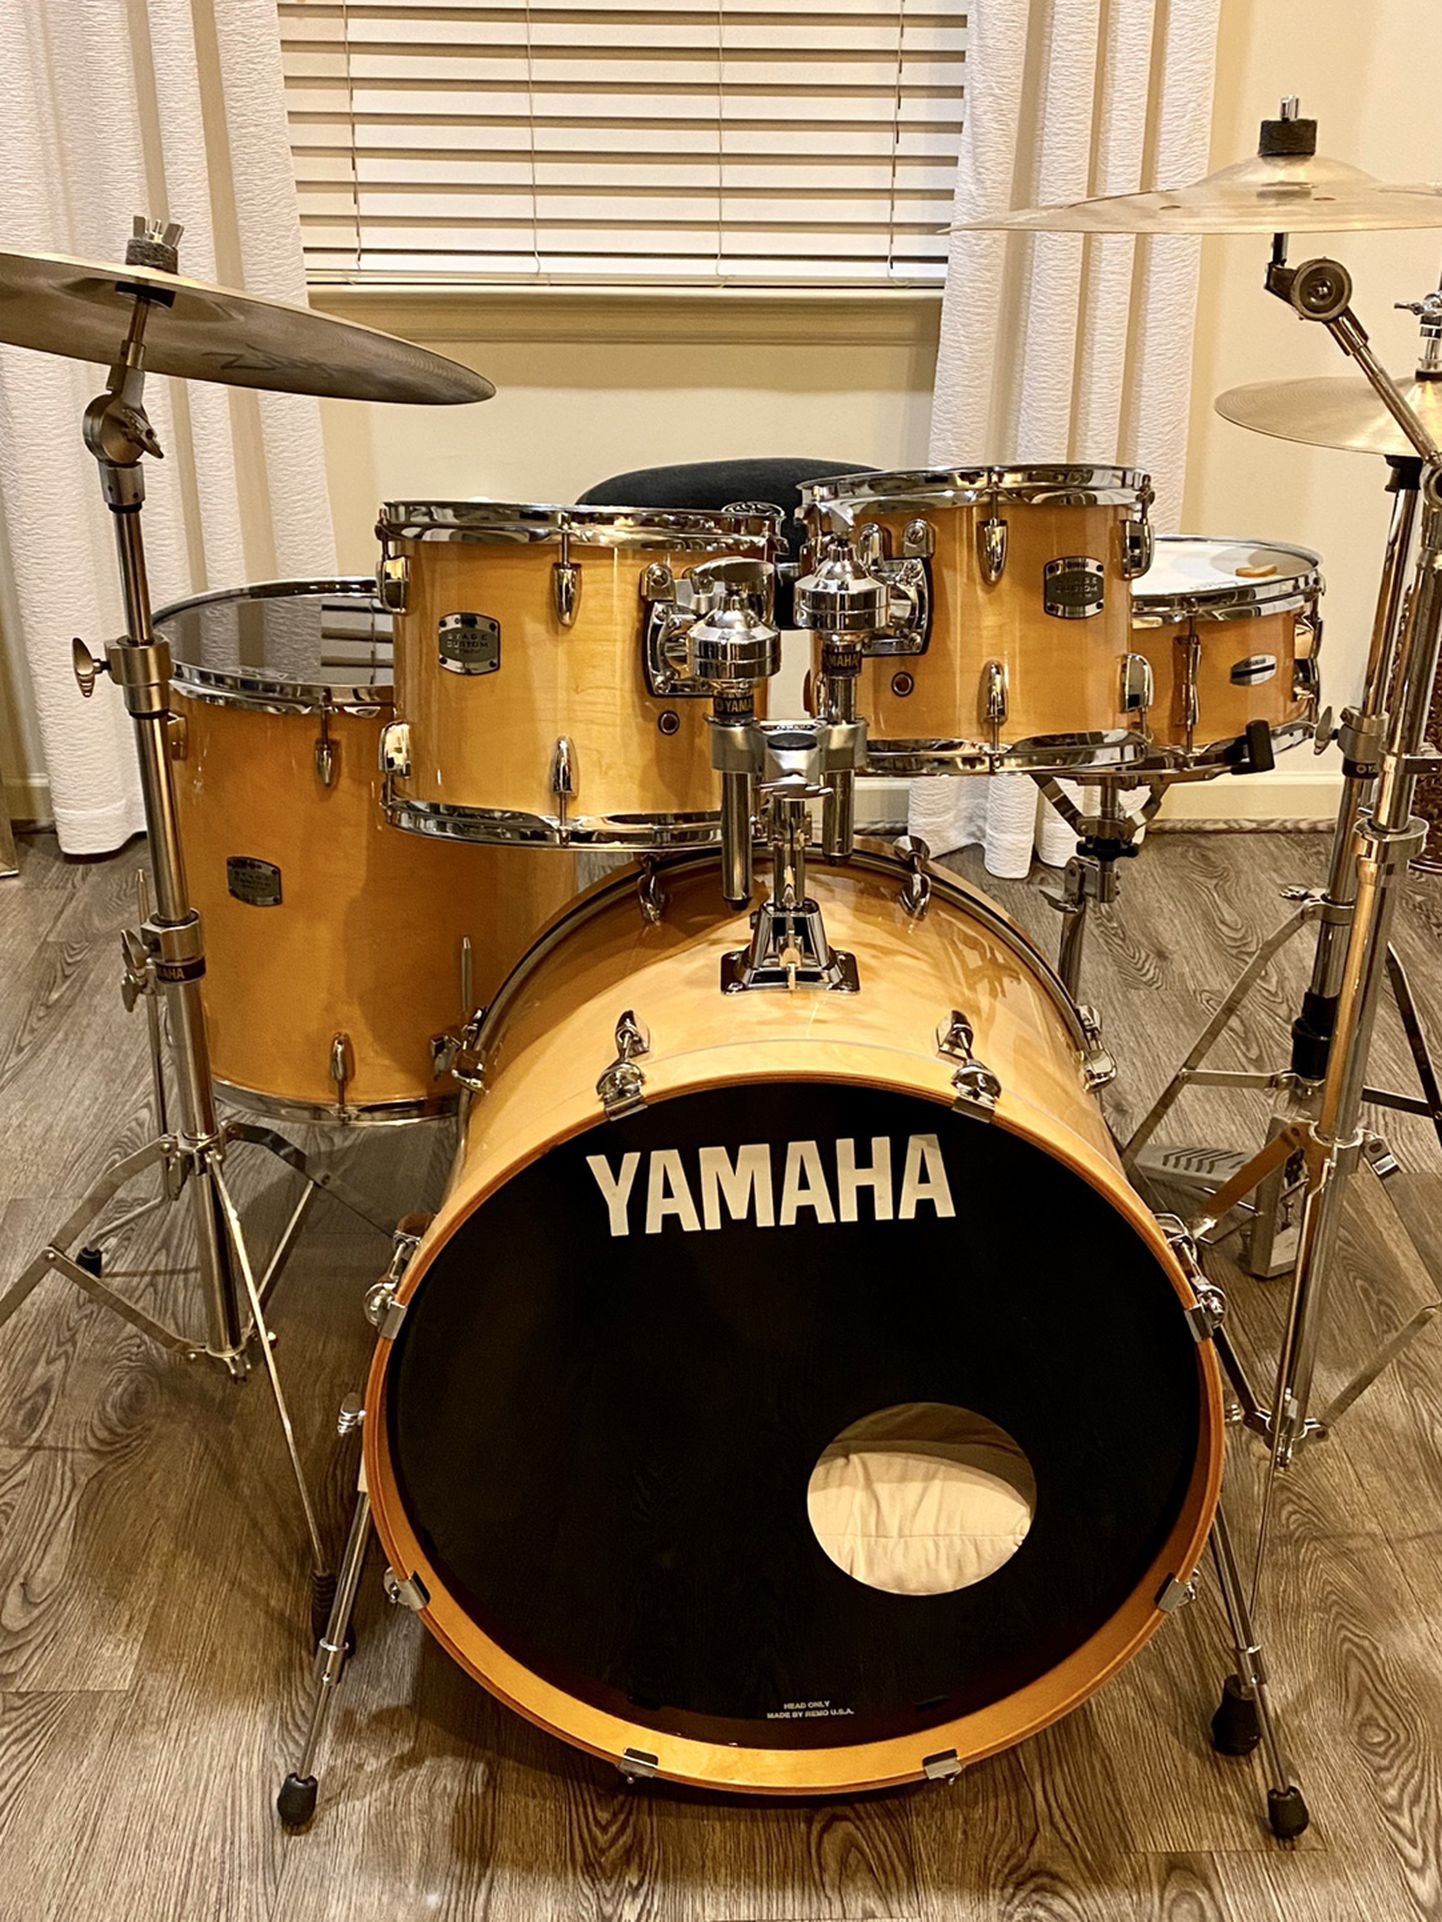 Yamaha Drum Set With Cymbals And Hardware